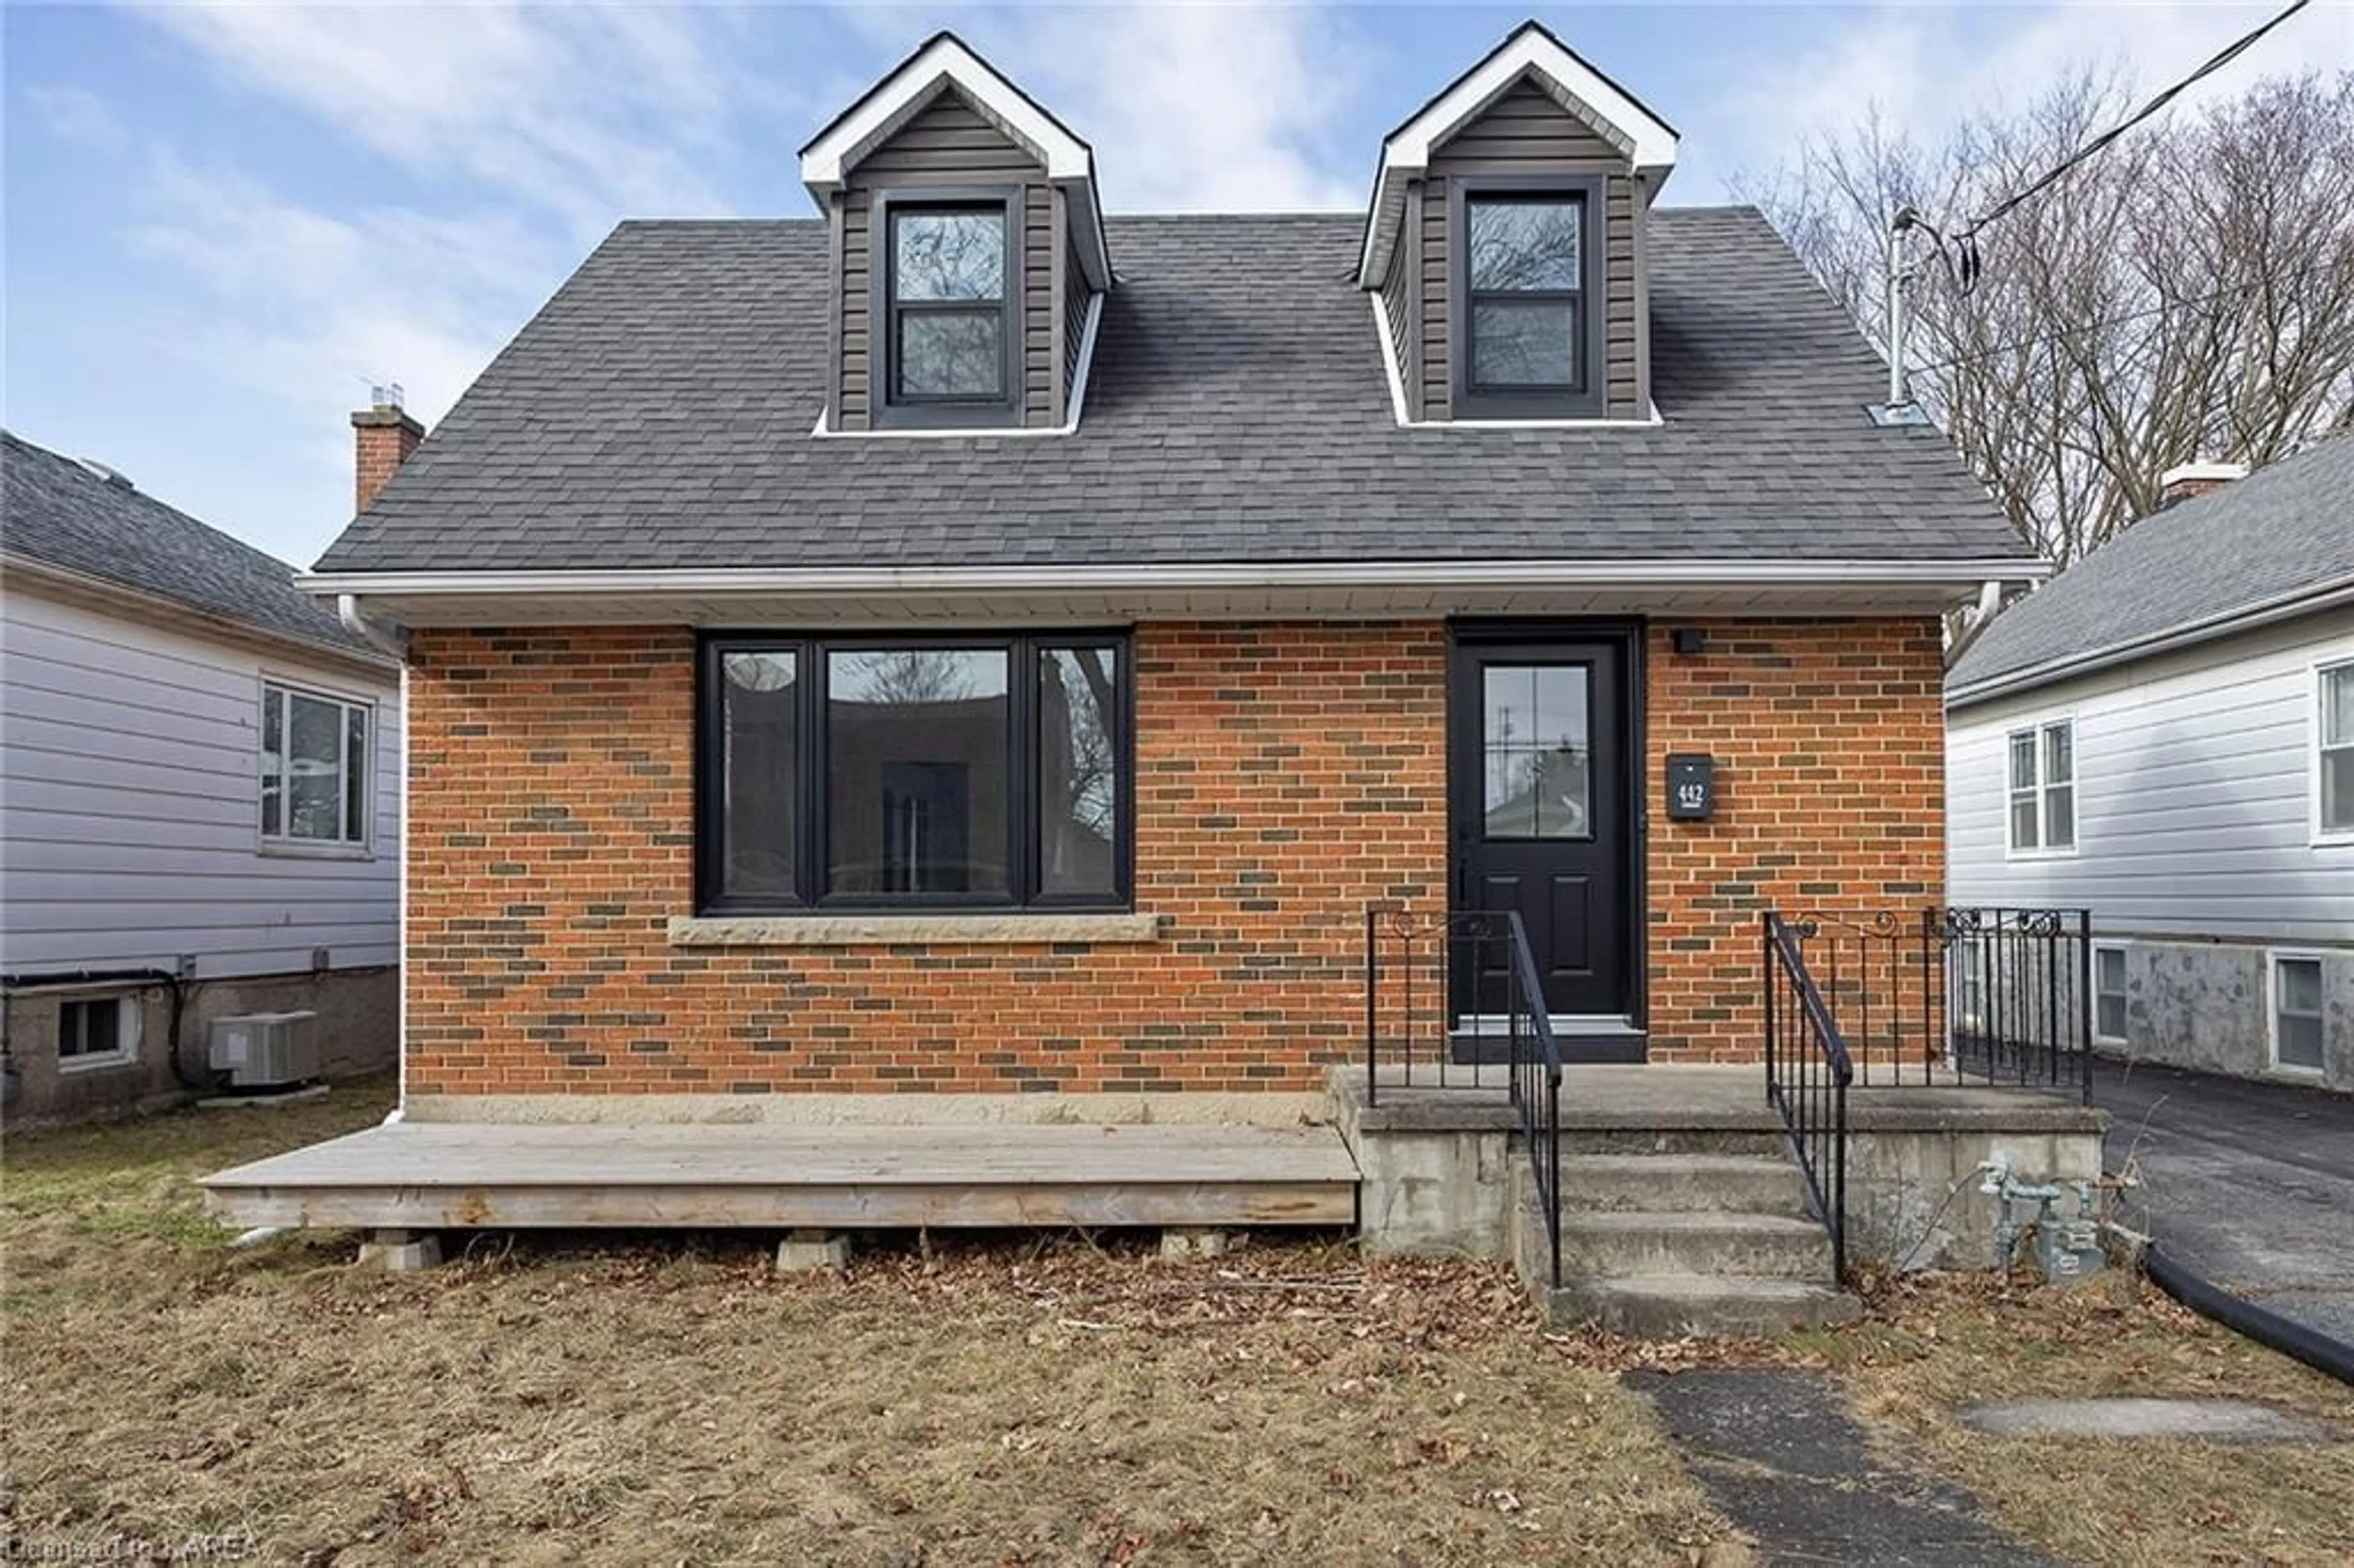 Home with brick exterior material for 442 College St, Kingston Ontario K7L 4M7